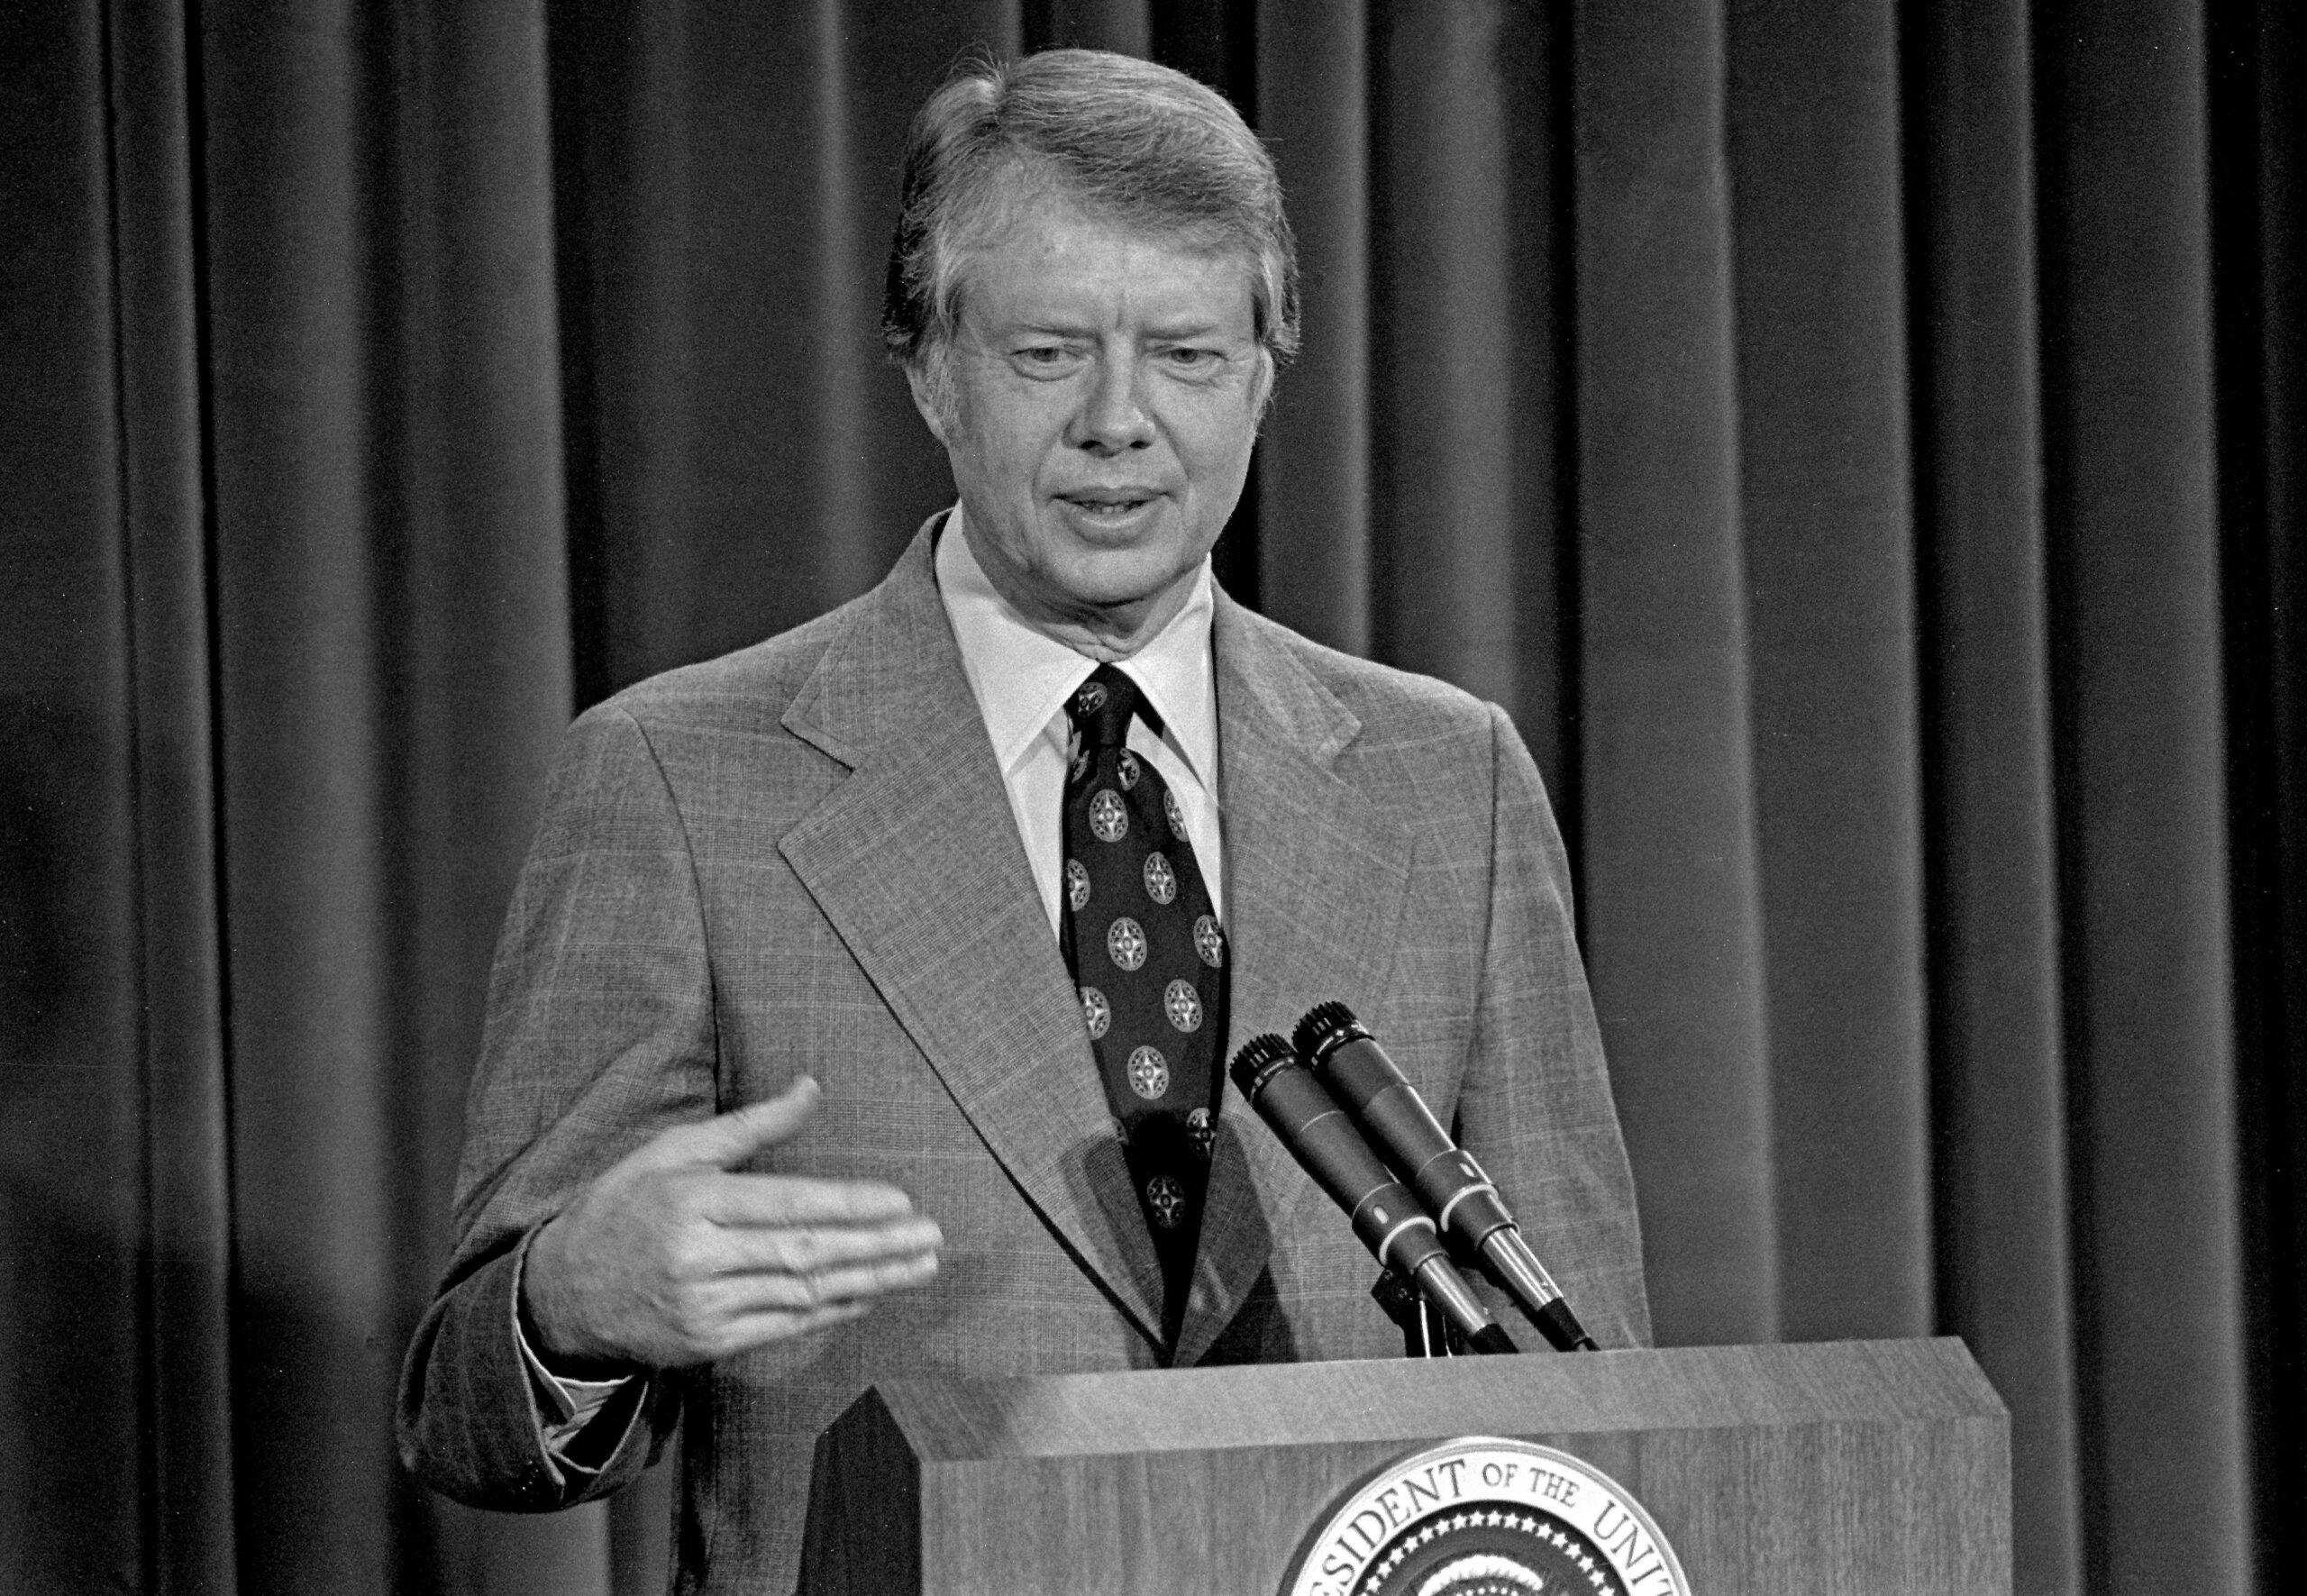 Sad News Of Jimmy Carter's 'Final Chapter' Triggering Long-Time Admirers